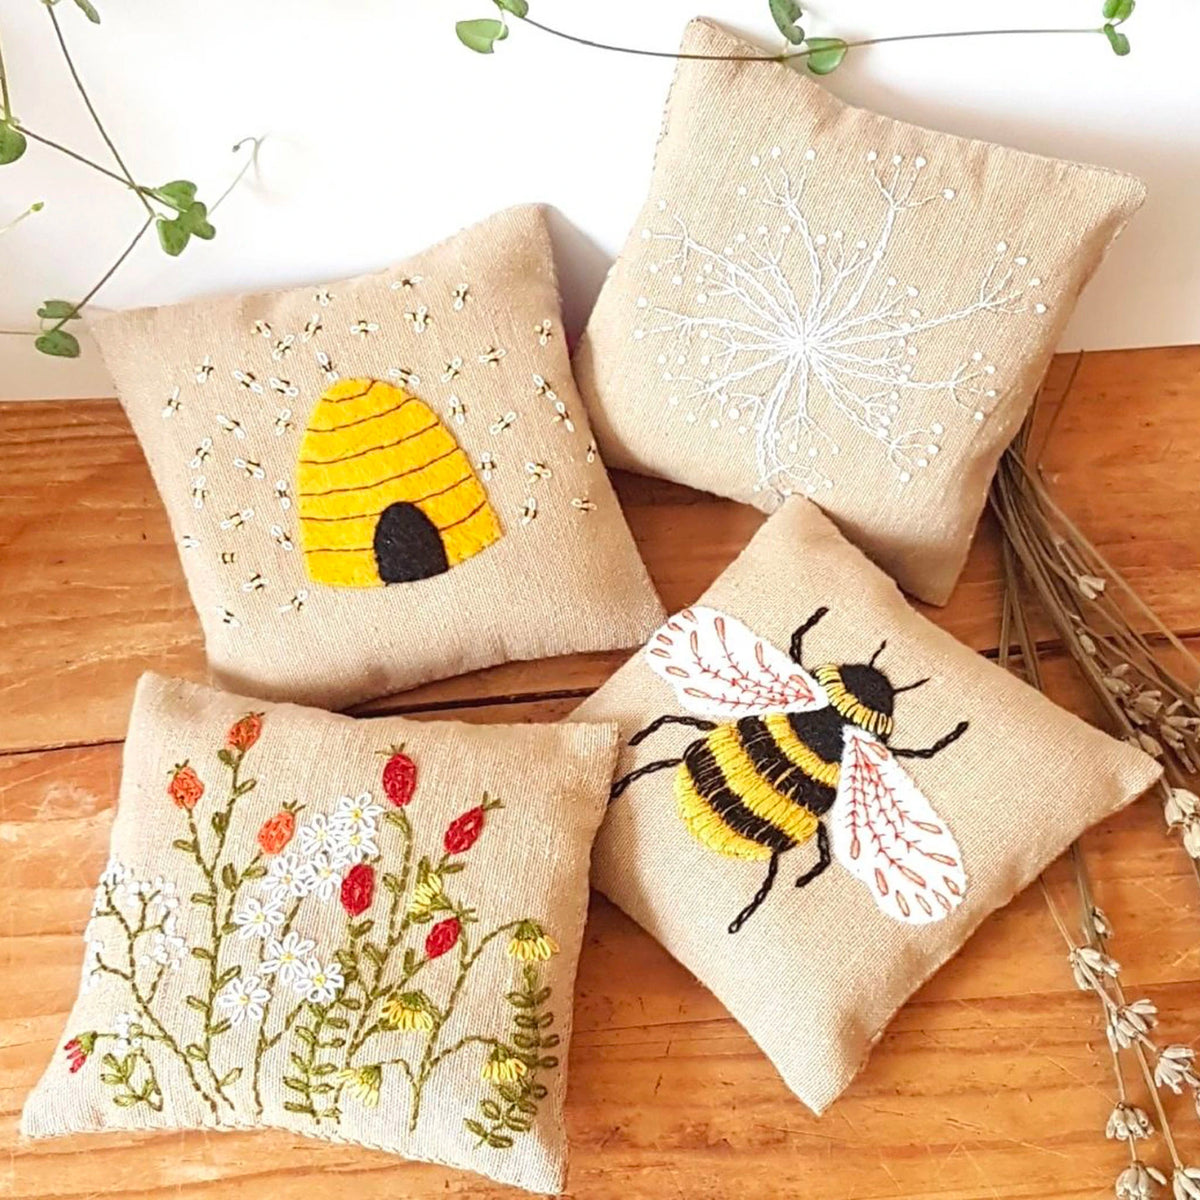 Linen Lavender Bags Hand Embroidery Kit - Bees